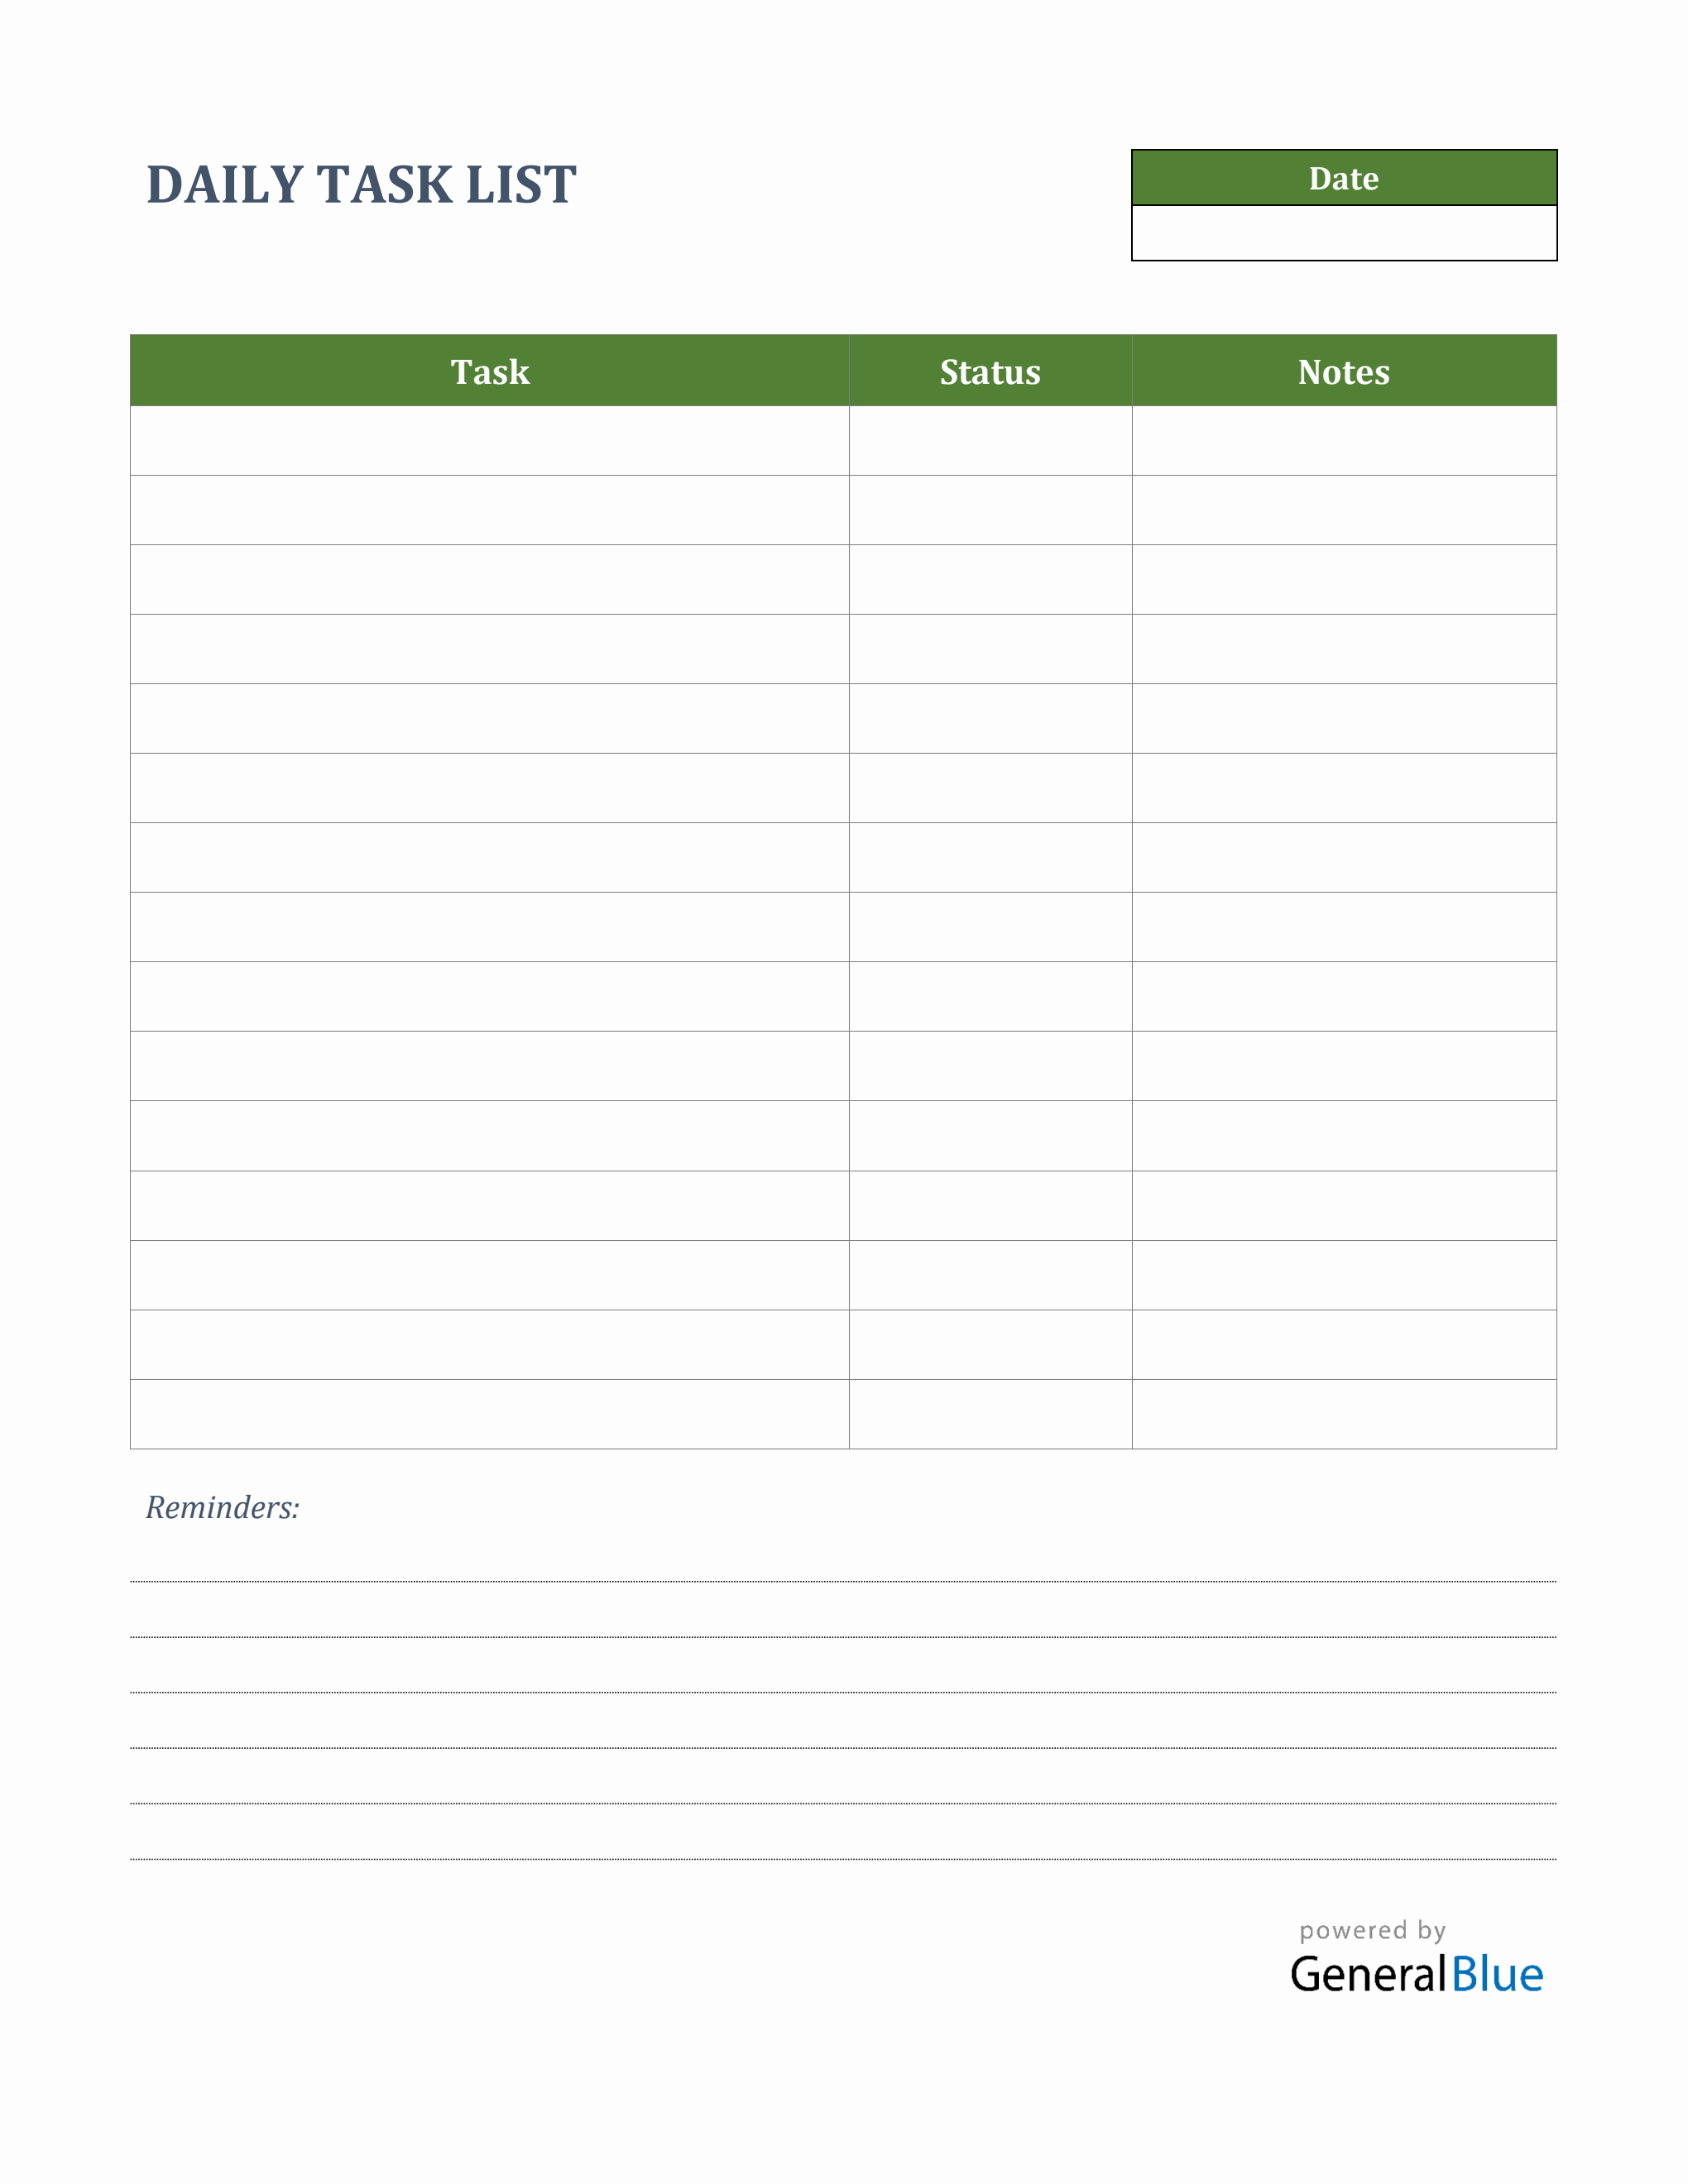 Daily Task List Template in Word Within Daily Task List Template Word